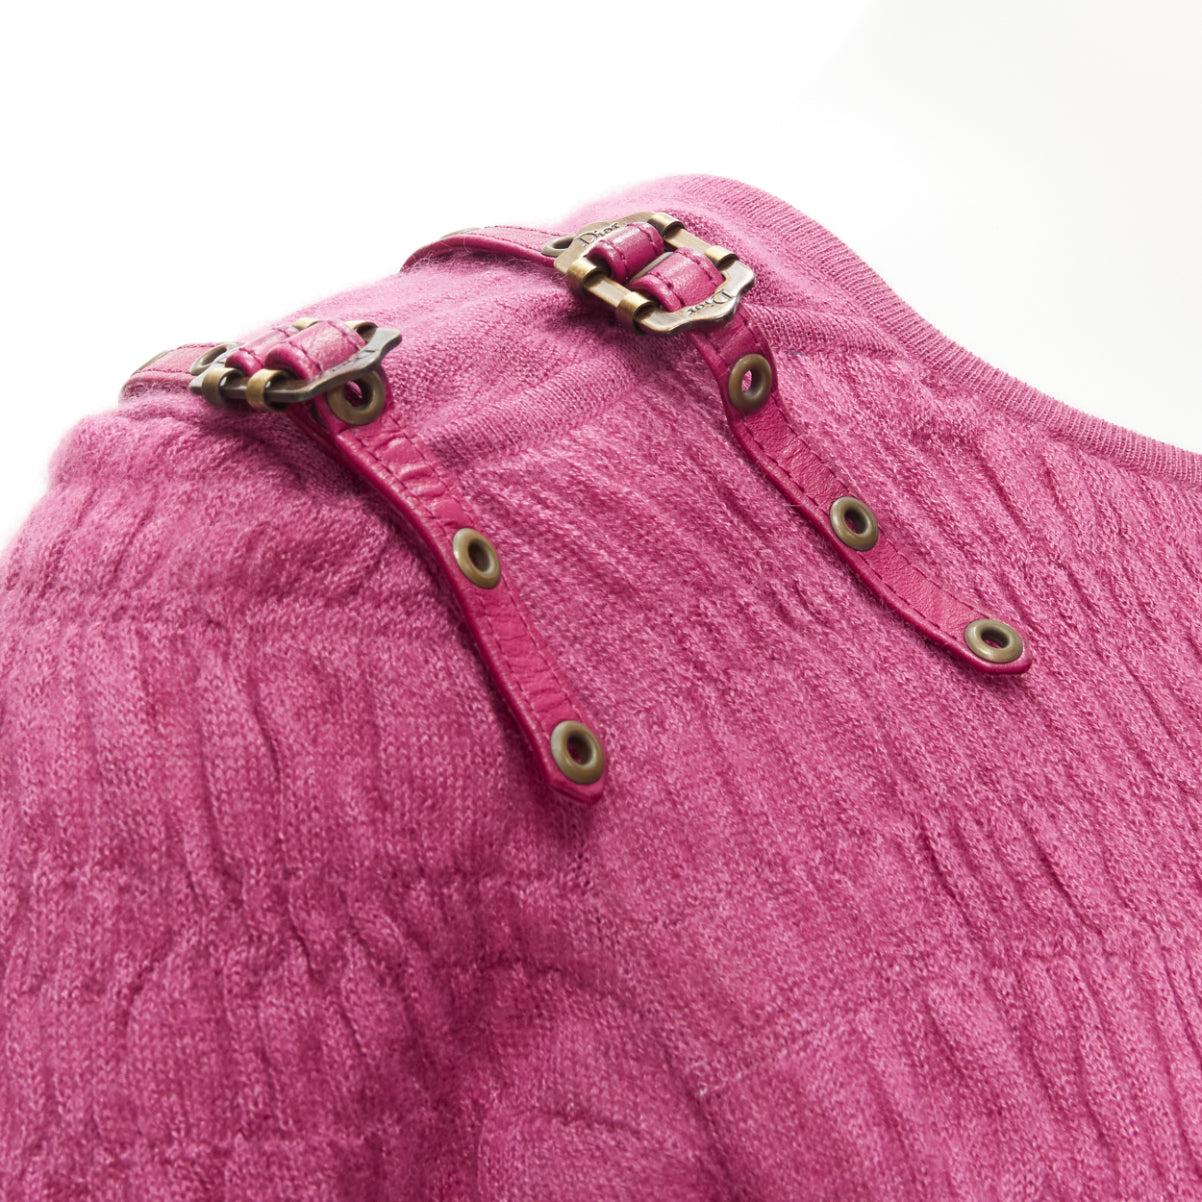 CHRISTIAN DIOR John Galliano Vintage rose pink bondage strap shirred sweater top FR40 L
Reference: TGAS/D00557
Brand: Christian Dior
Designer: John Galliano
Material: Cashmere, Silk
Color: Pink
Pattern: Solid
Closure: Pullover
Extra Details: CD